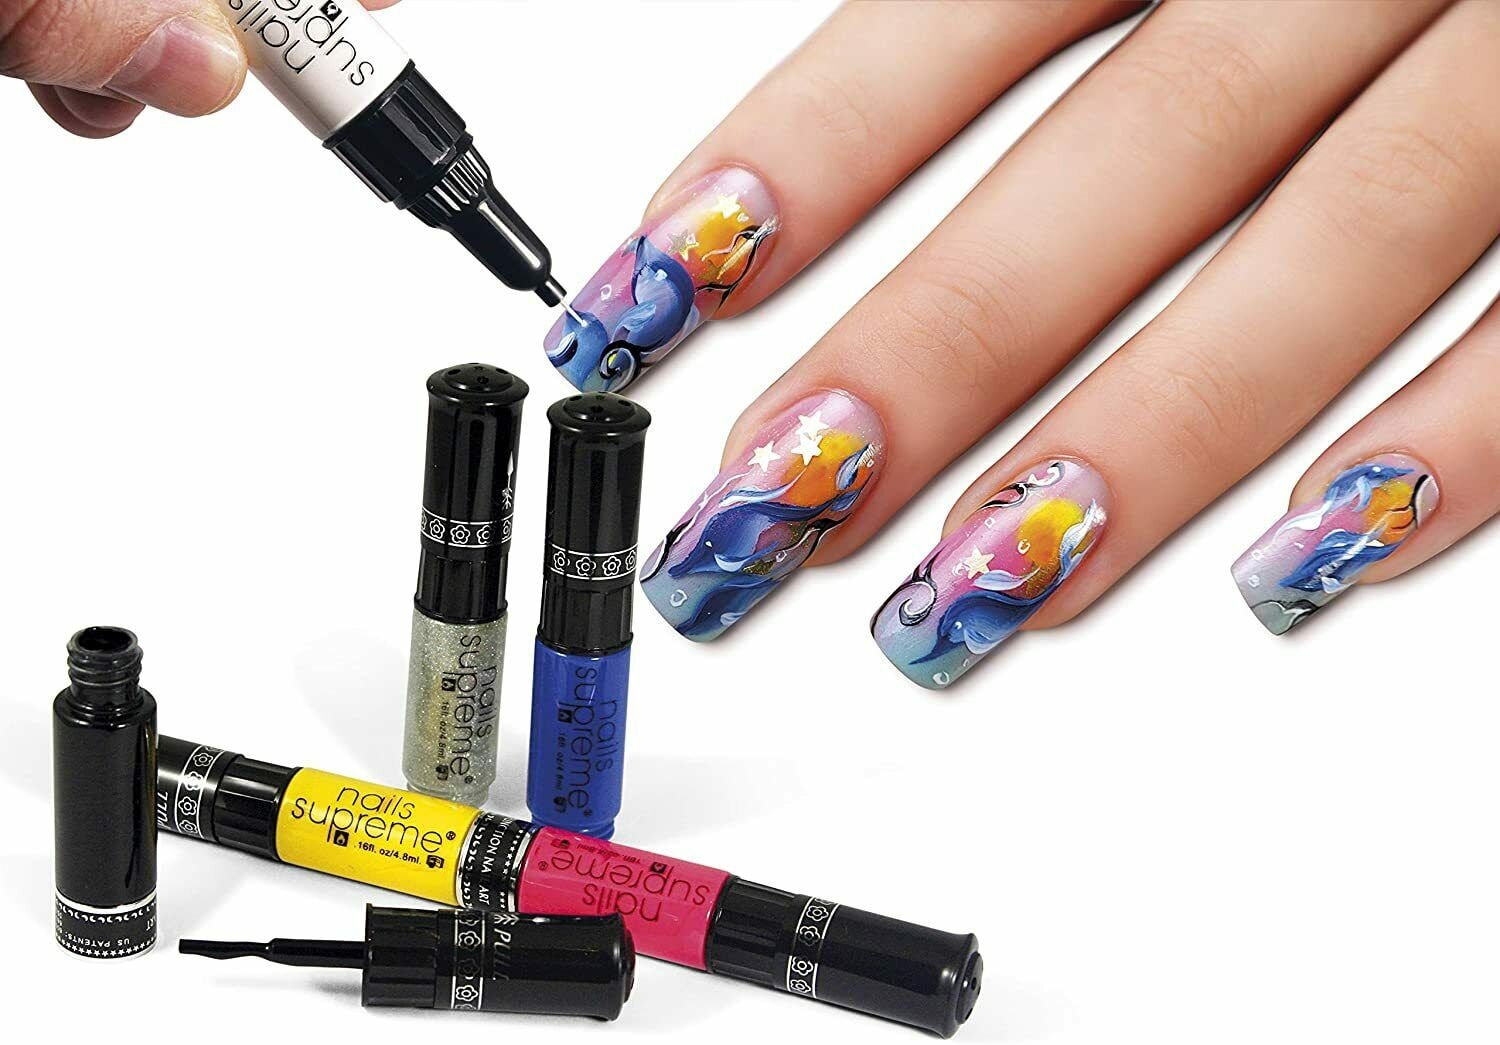 4. Top Rated Nail Art Pens on eBay - wide 6